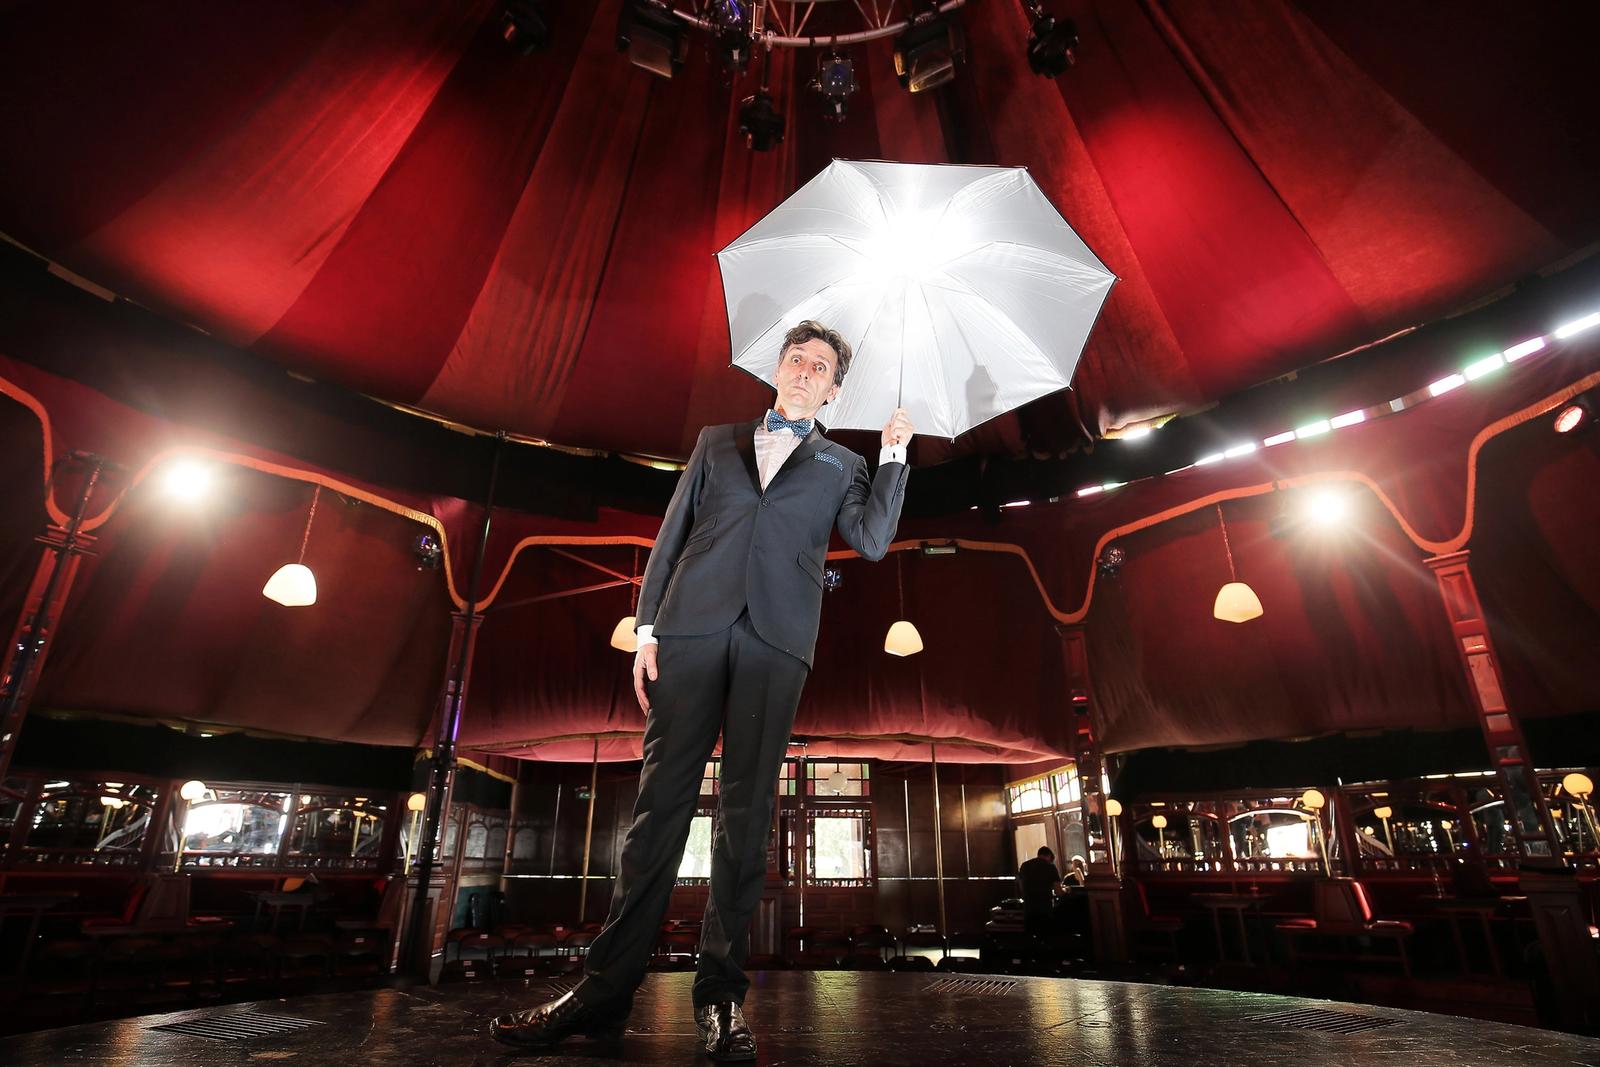 Frank Woodley at the Spiegeltent in Hobart